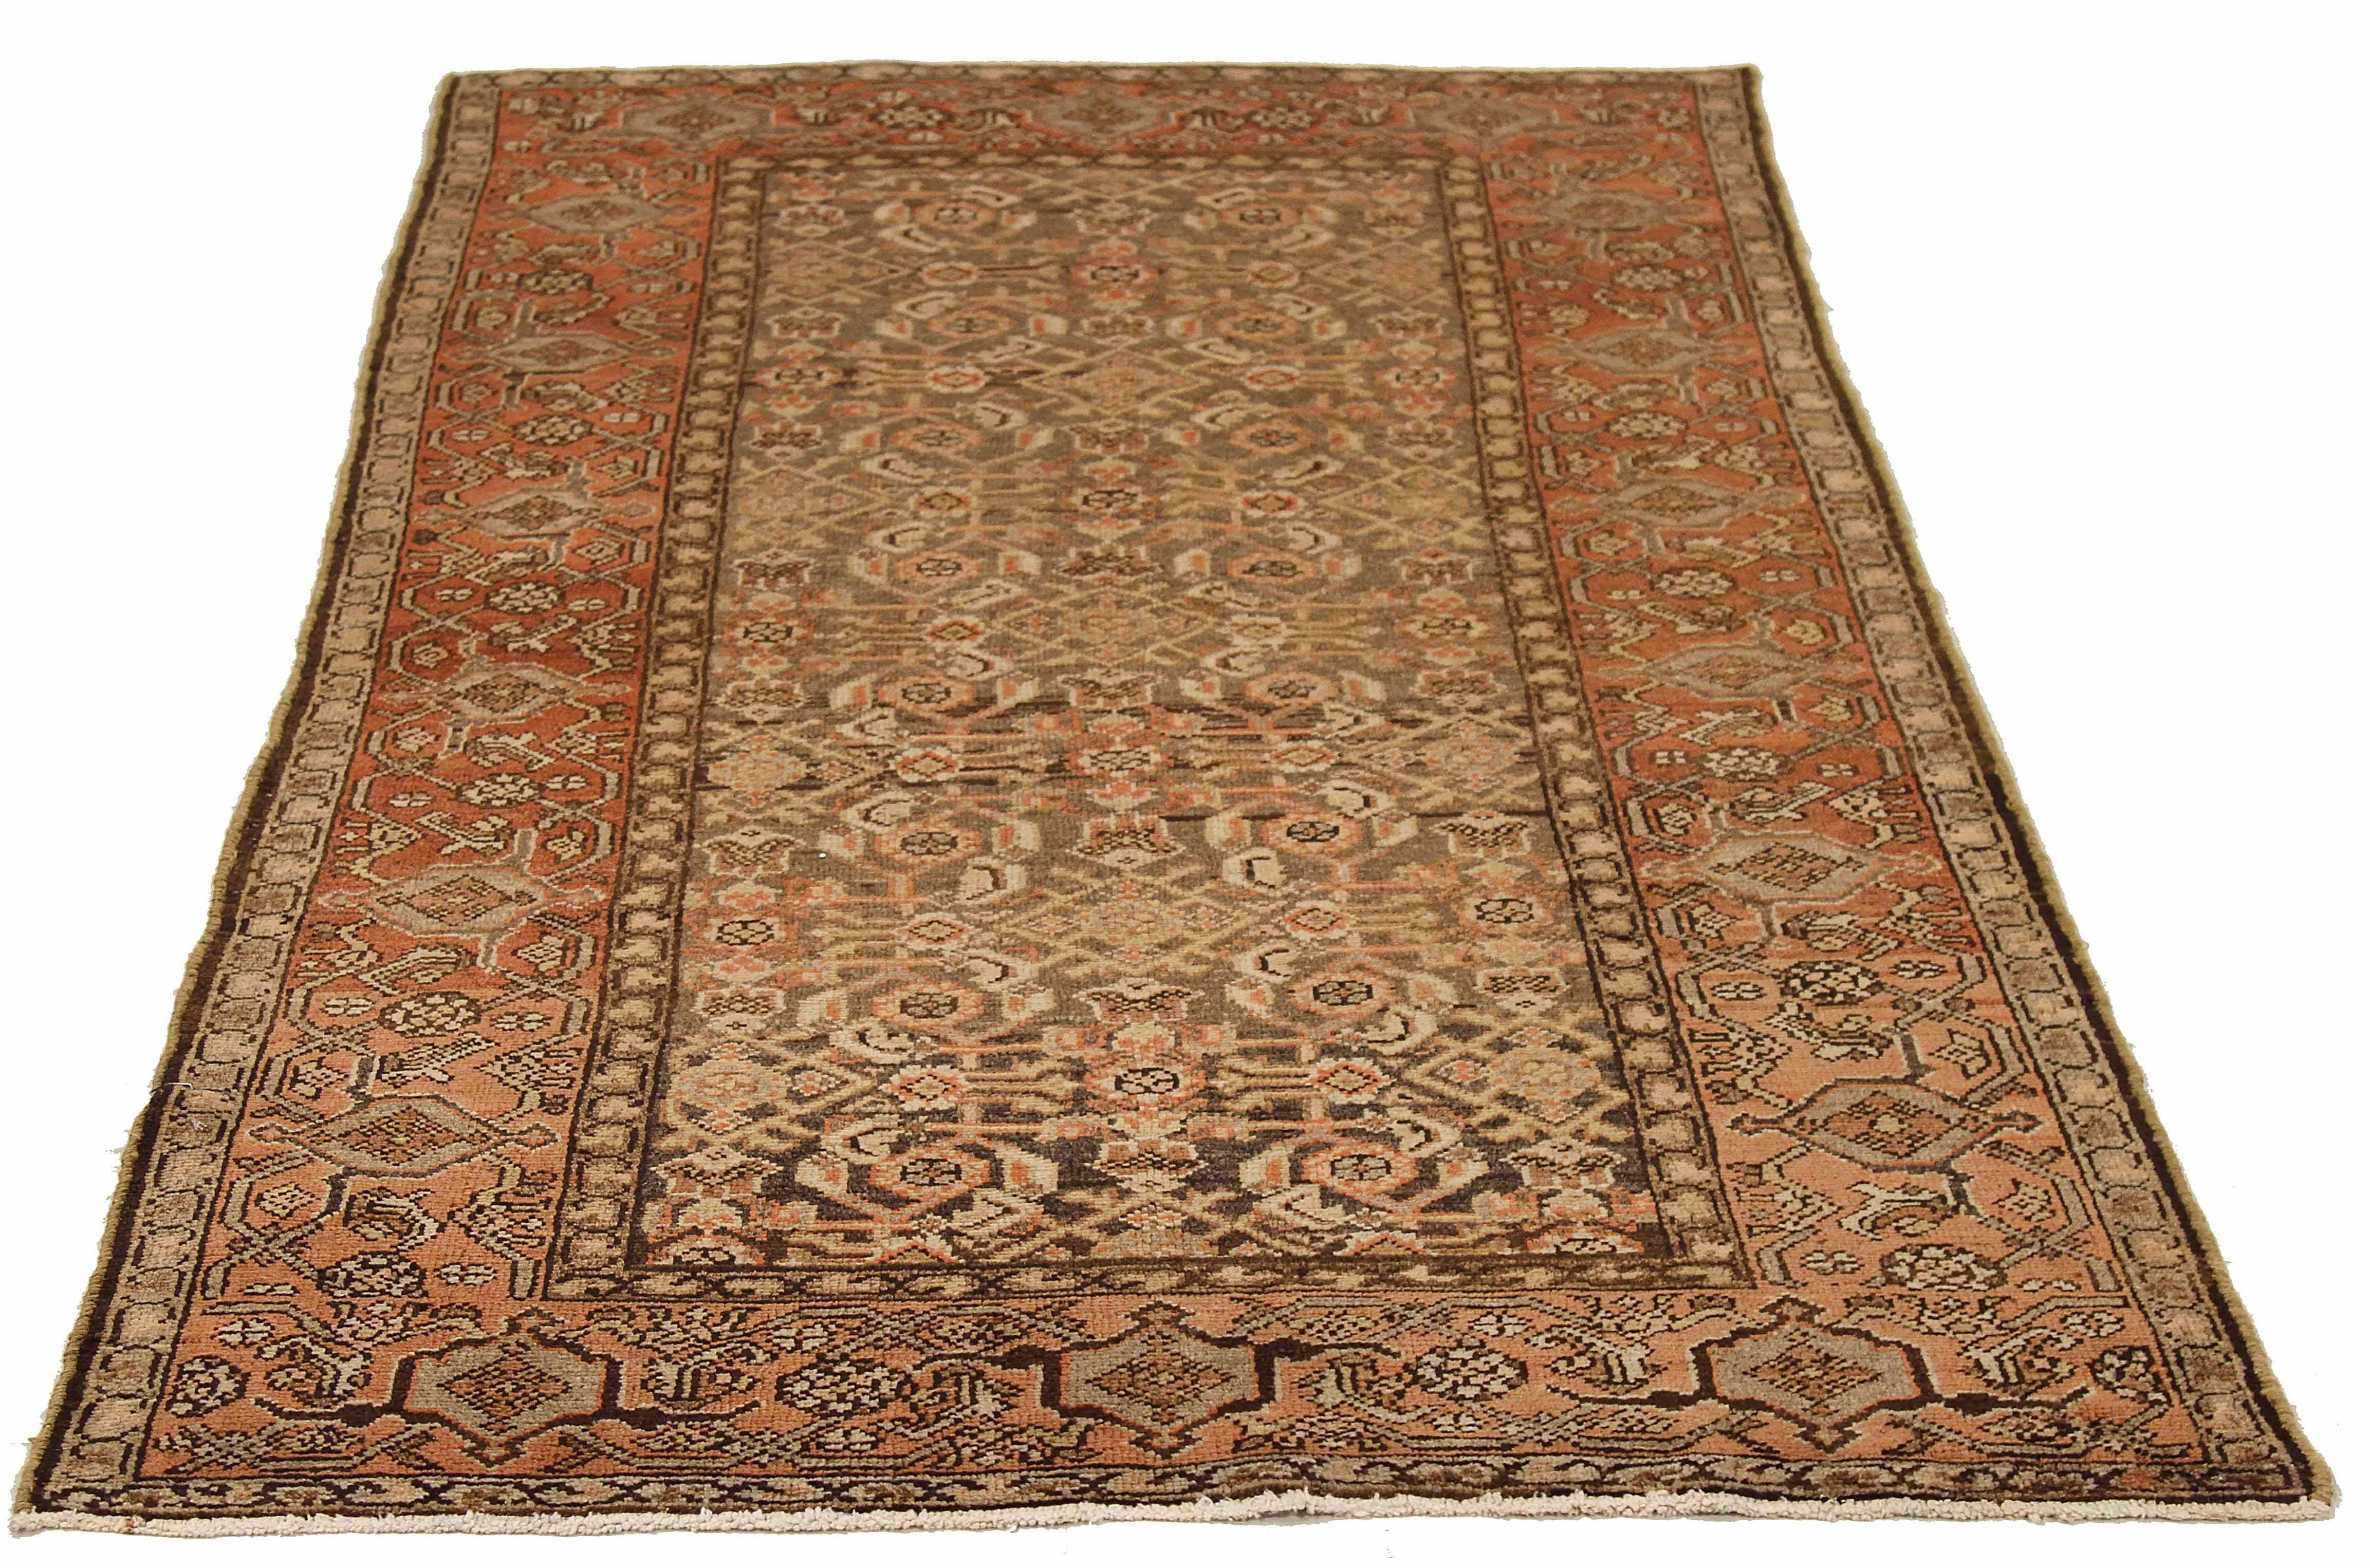 Antique Persian Area Rug - Handcrafted with Premium Sheep's Wool & Eco-Friendly Vegetable Dyes

Experience the timeless beauty of a handcrafted antique Persian area rug, woven from the finest sheep's wool and colored with all-natural,